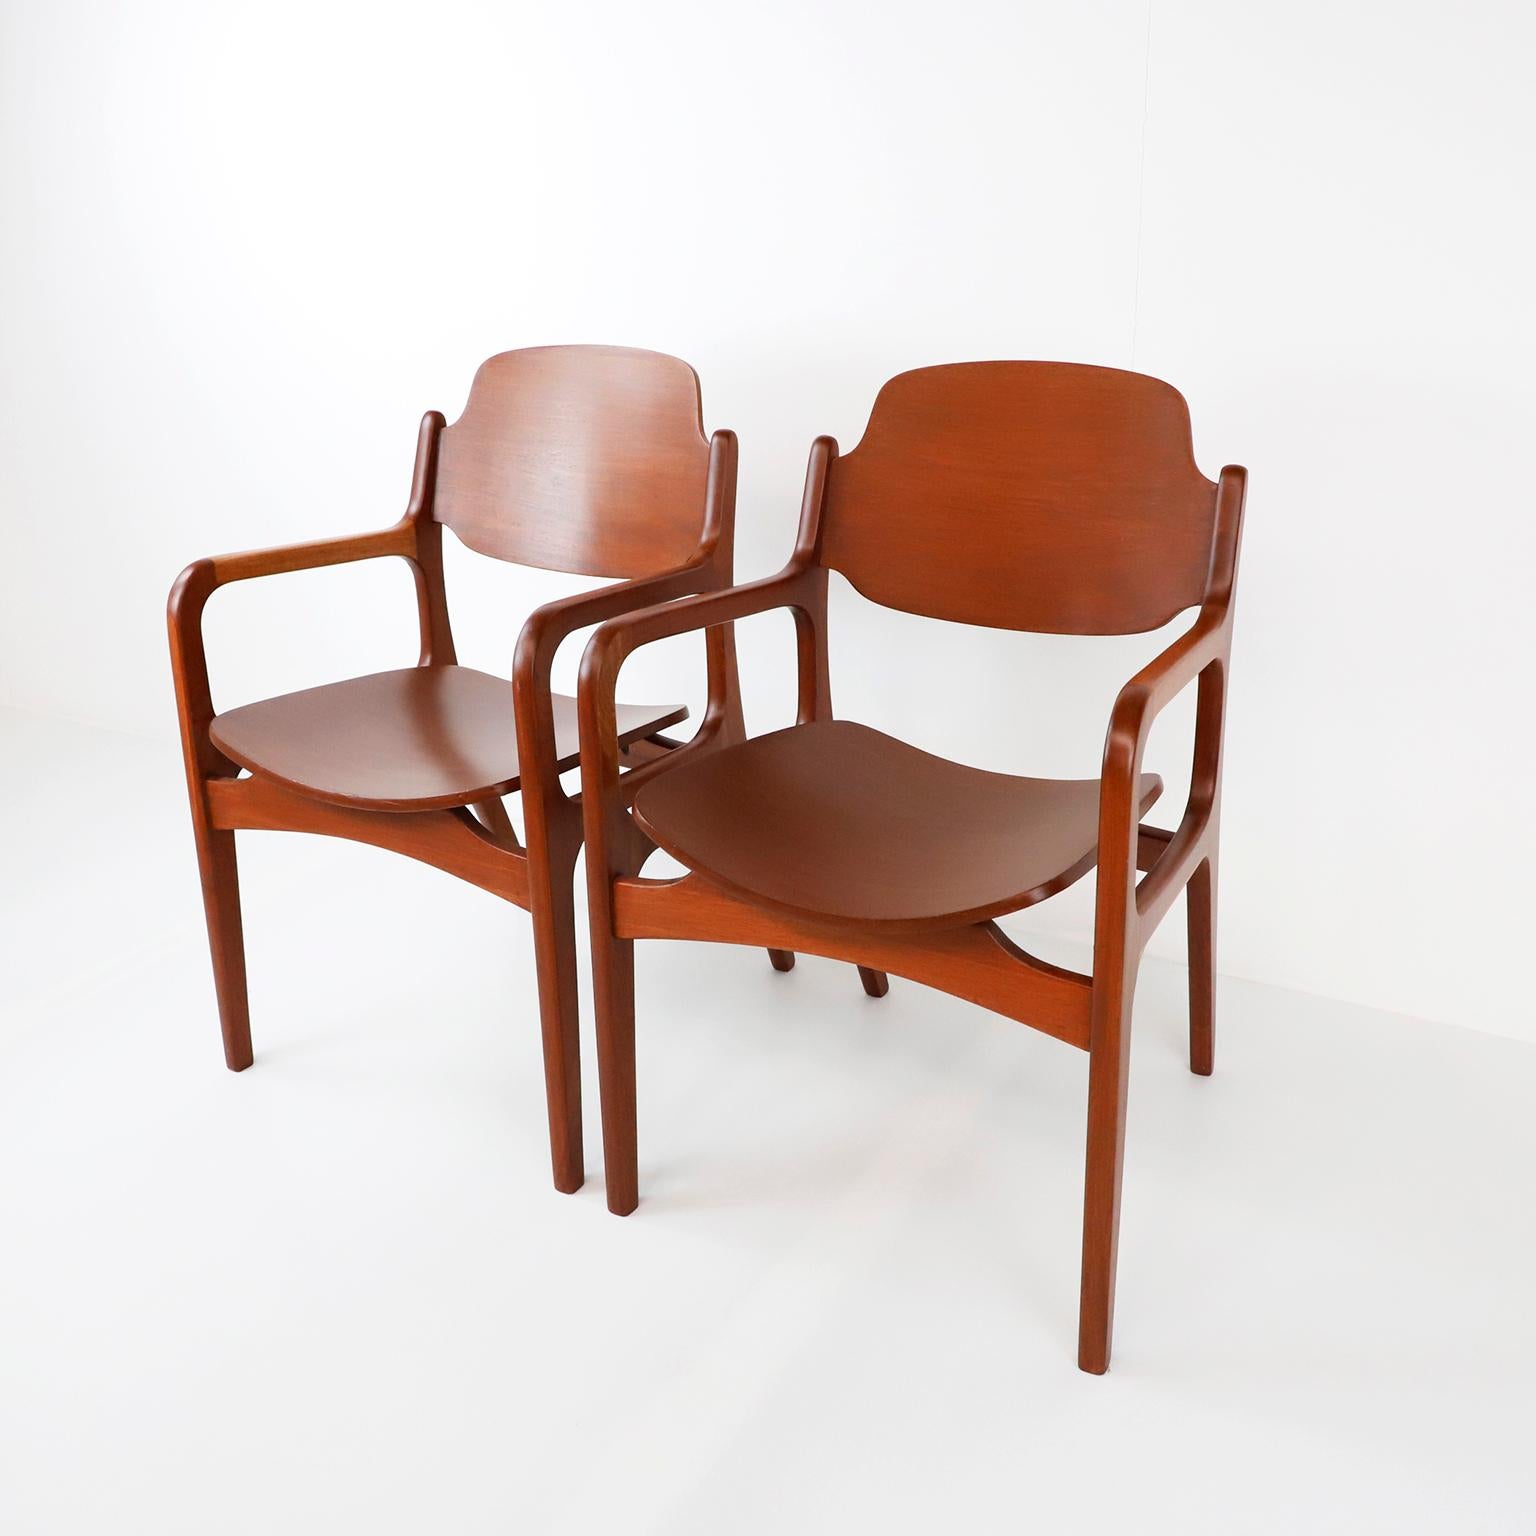 Circa 1960, we offer this set of two early chairs by Michael Van Beuren made in mahogany and plywood, includes brand label.

About Michael Van Beuren:

Michael Van Beuren (1911–2004) was born in New York and studied architecture at the Bauhaus